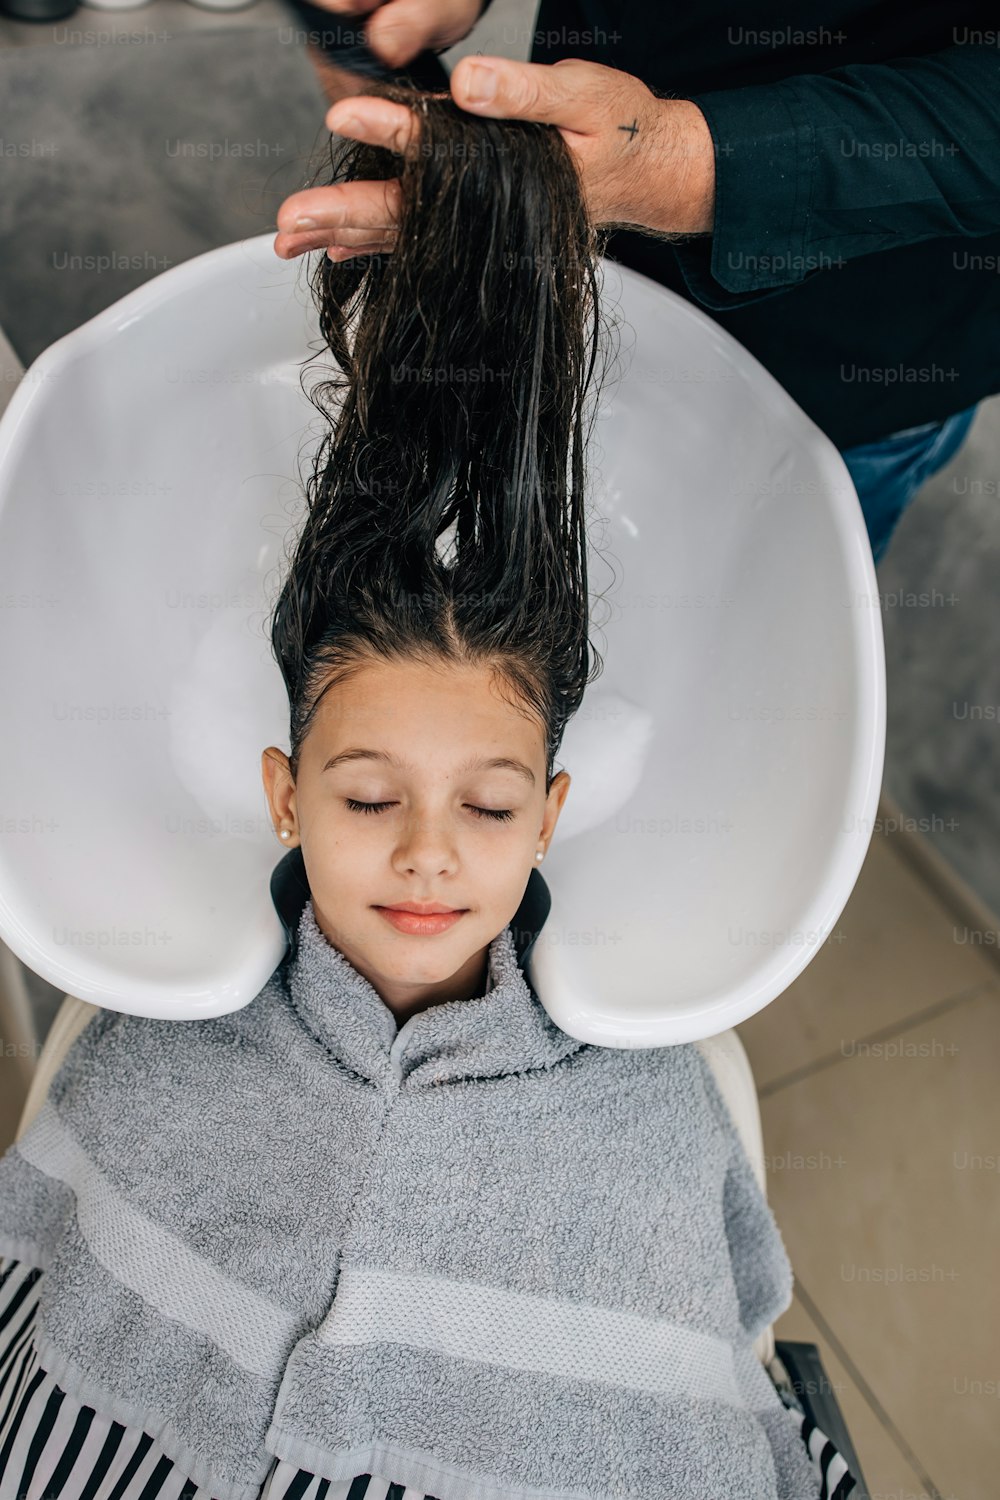 Young girl at hairstyle treatment while professional hairdresser gently washing her hair.